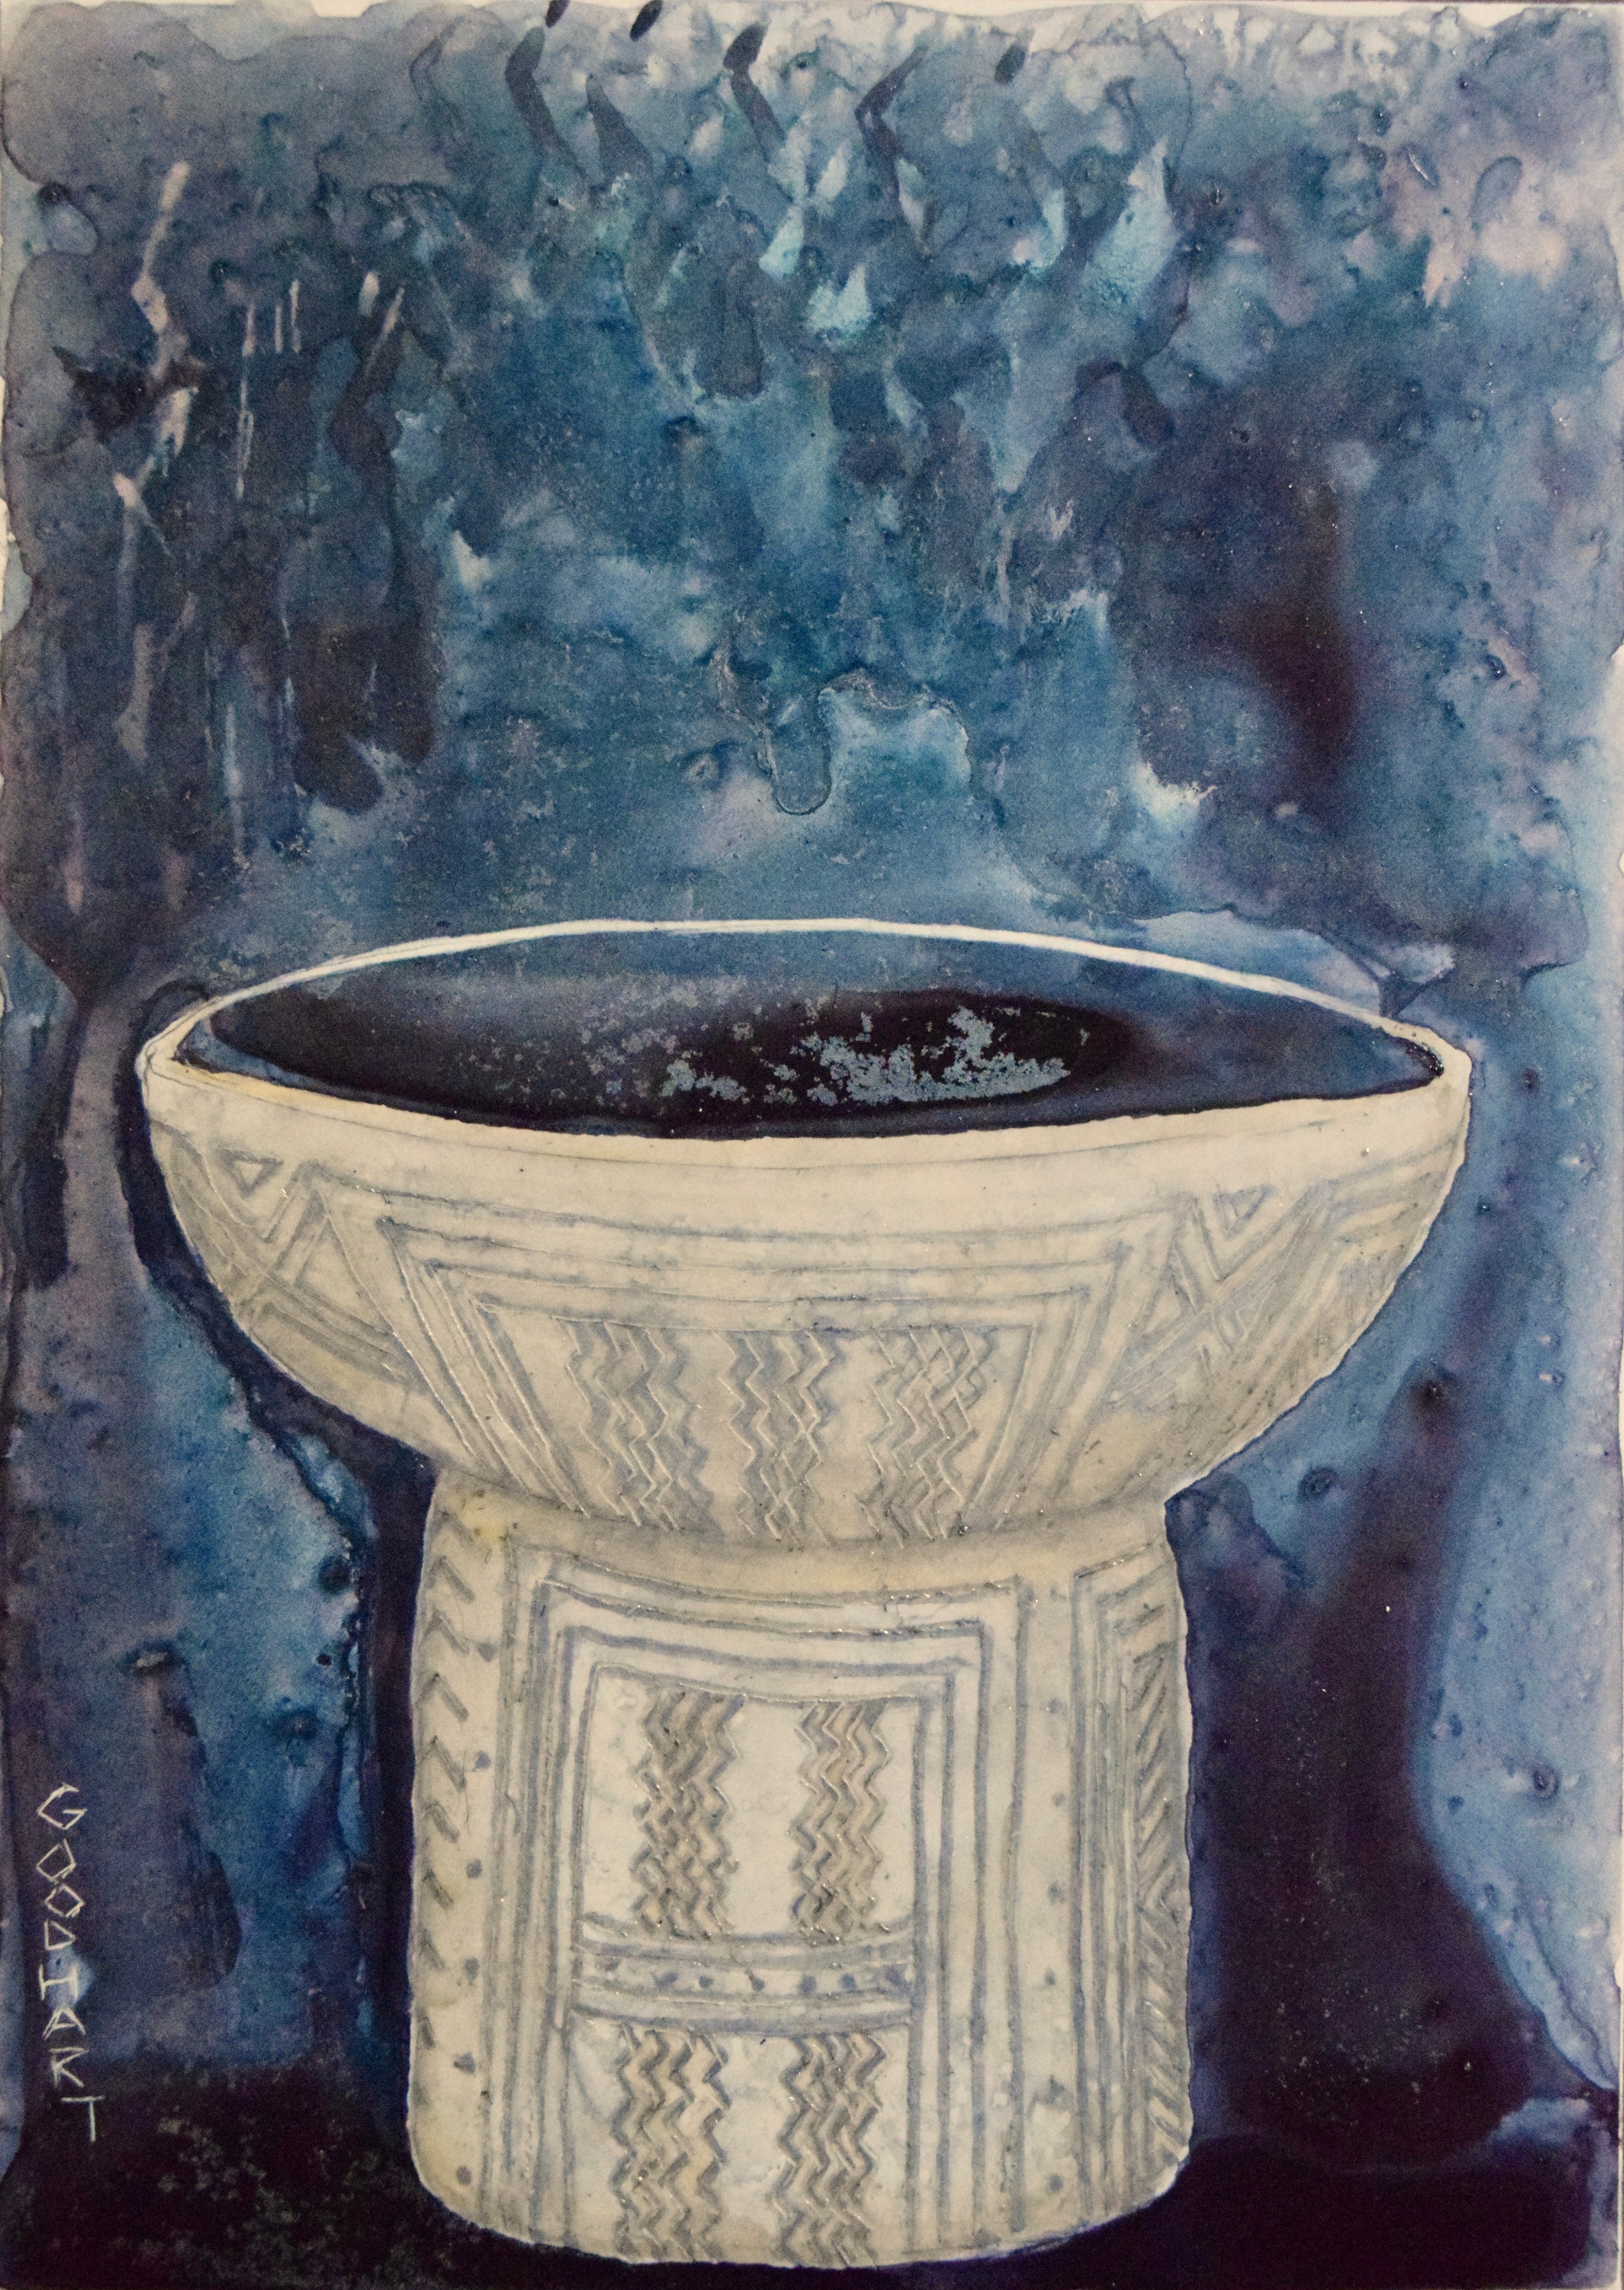 'ETCHED FOOTED CUP' - Mixed Media on Panel